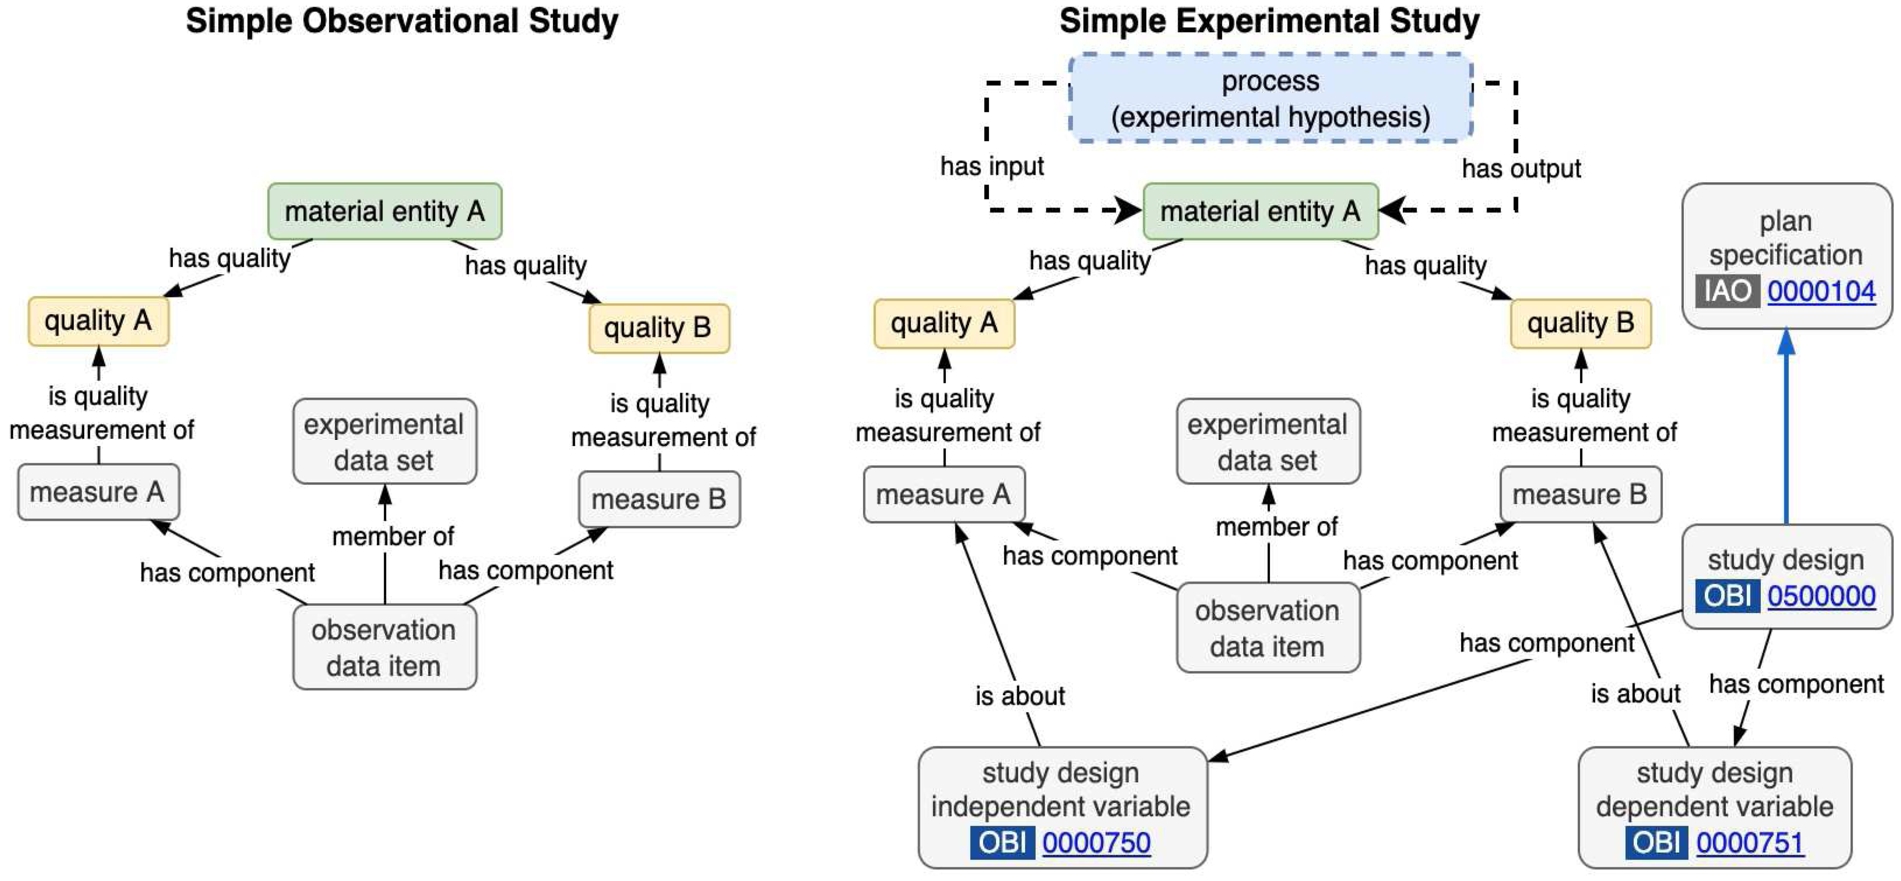 Schematic comparing simple 2 variable observational and experimental study designs (for example dietary pattern and weight).